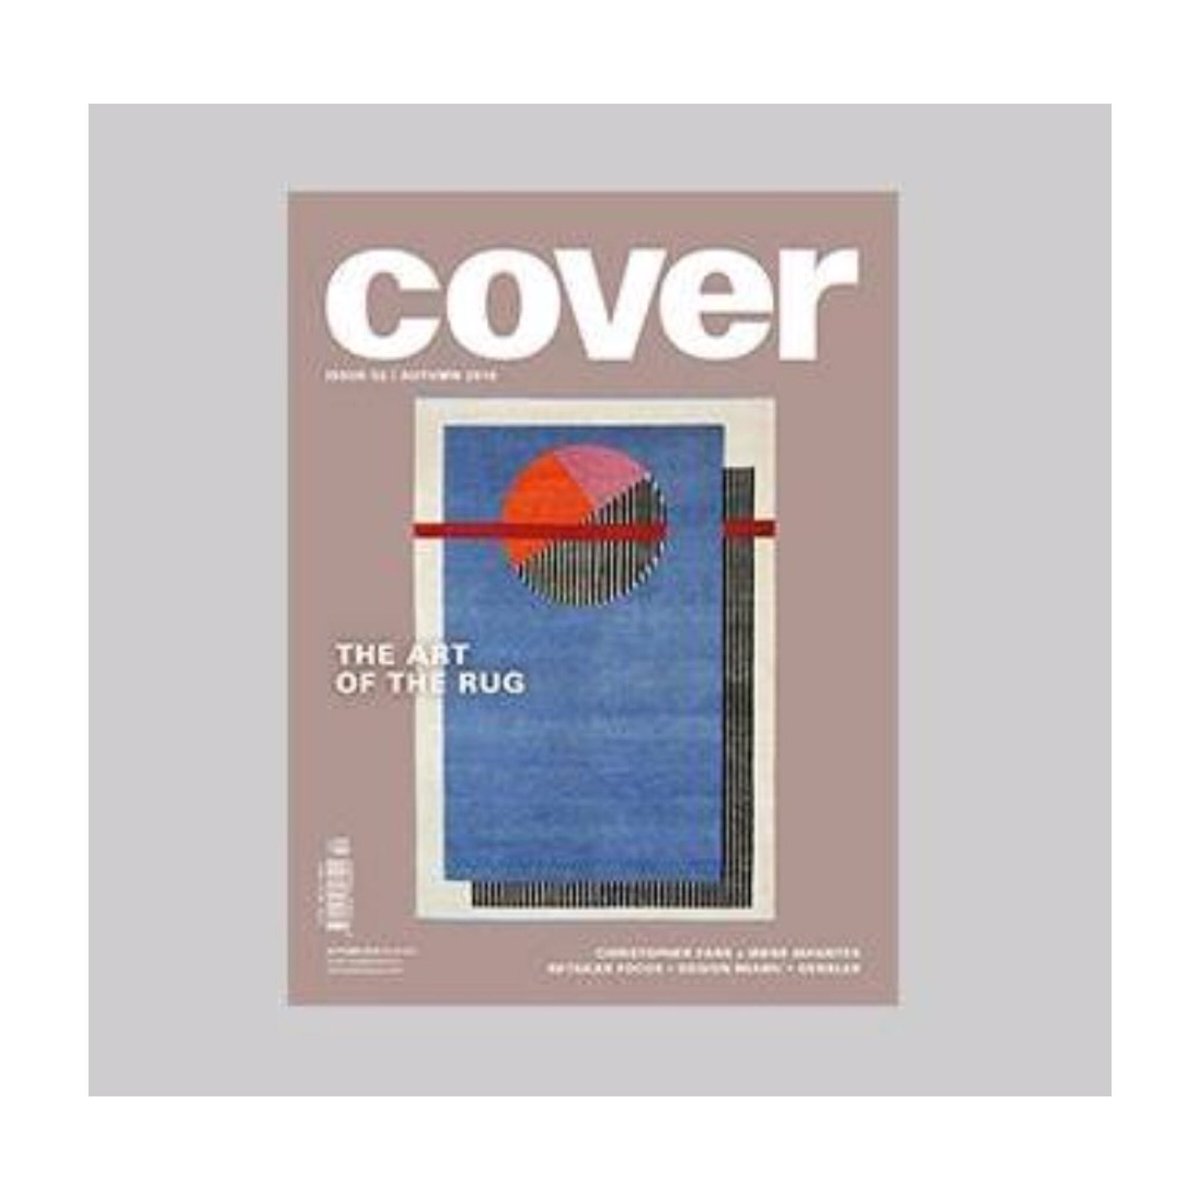 Luke Irwin listed in @COVERMag2005 guide to 'The Best of the London Design Festival 2018'. View the Sari Silk Collection made from recycled saris. Monday late night 6-8pm and Tues/Wed/Thurs 10-4pm 20-22 Pimlico Road SW1.